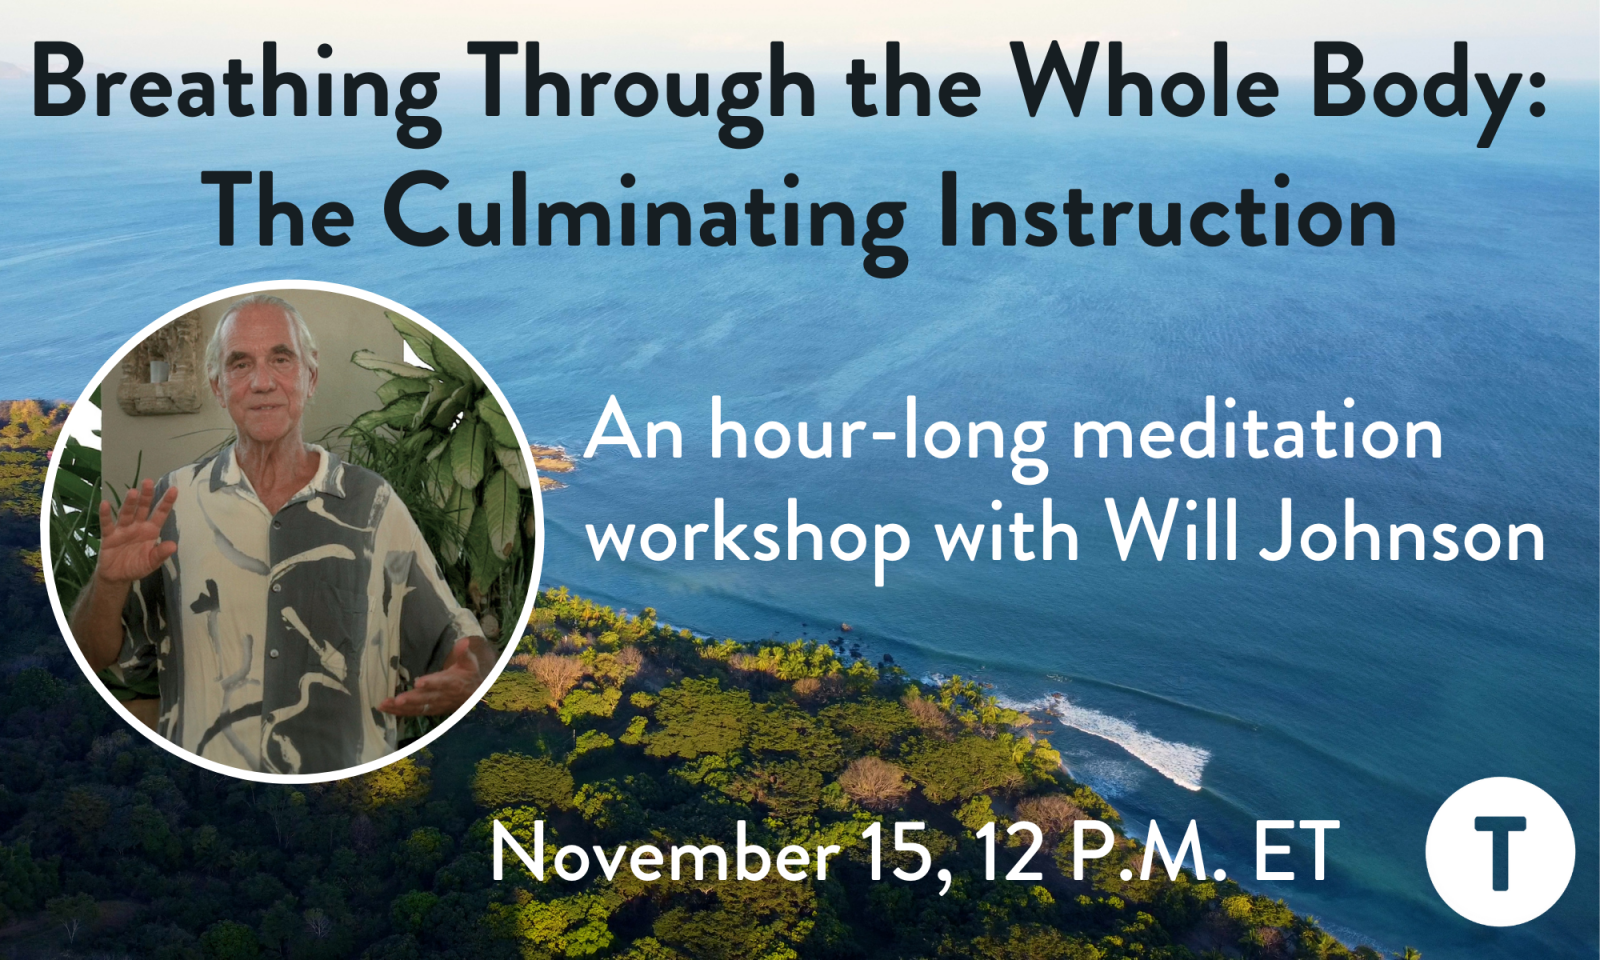 Breathing Through the Whole Body: The Culminating Instruction With Will Johnson